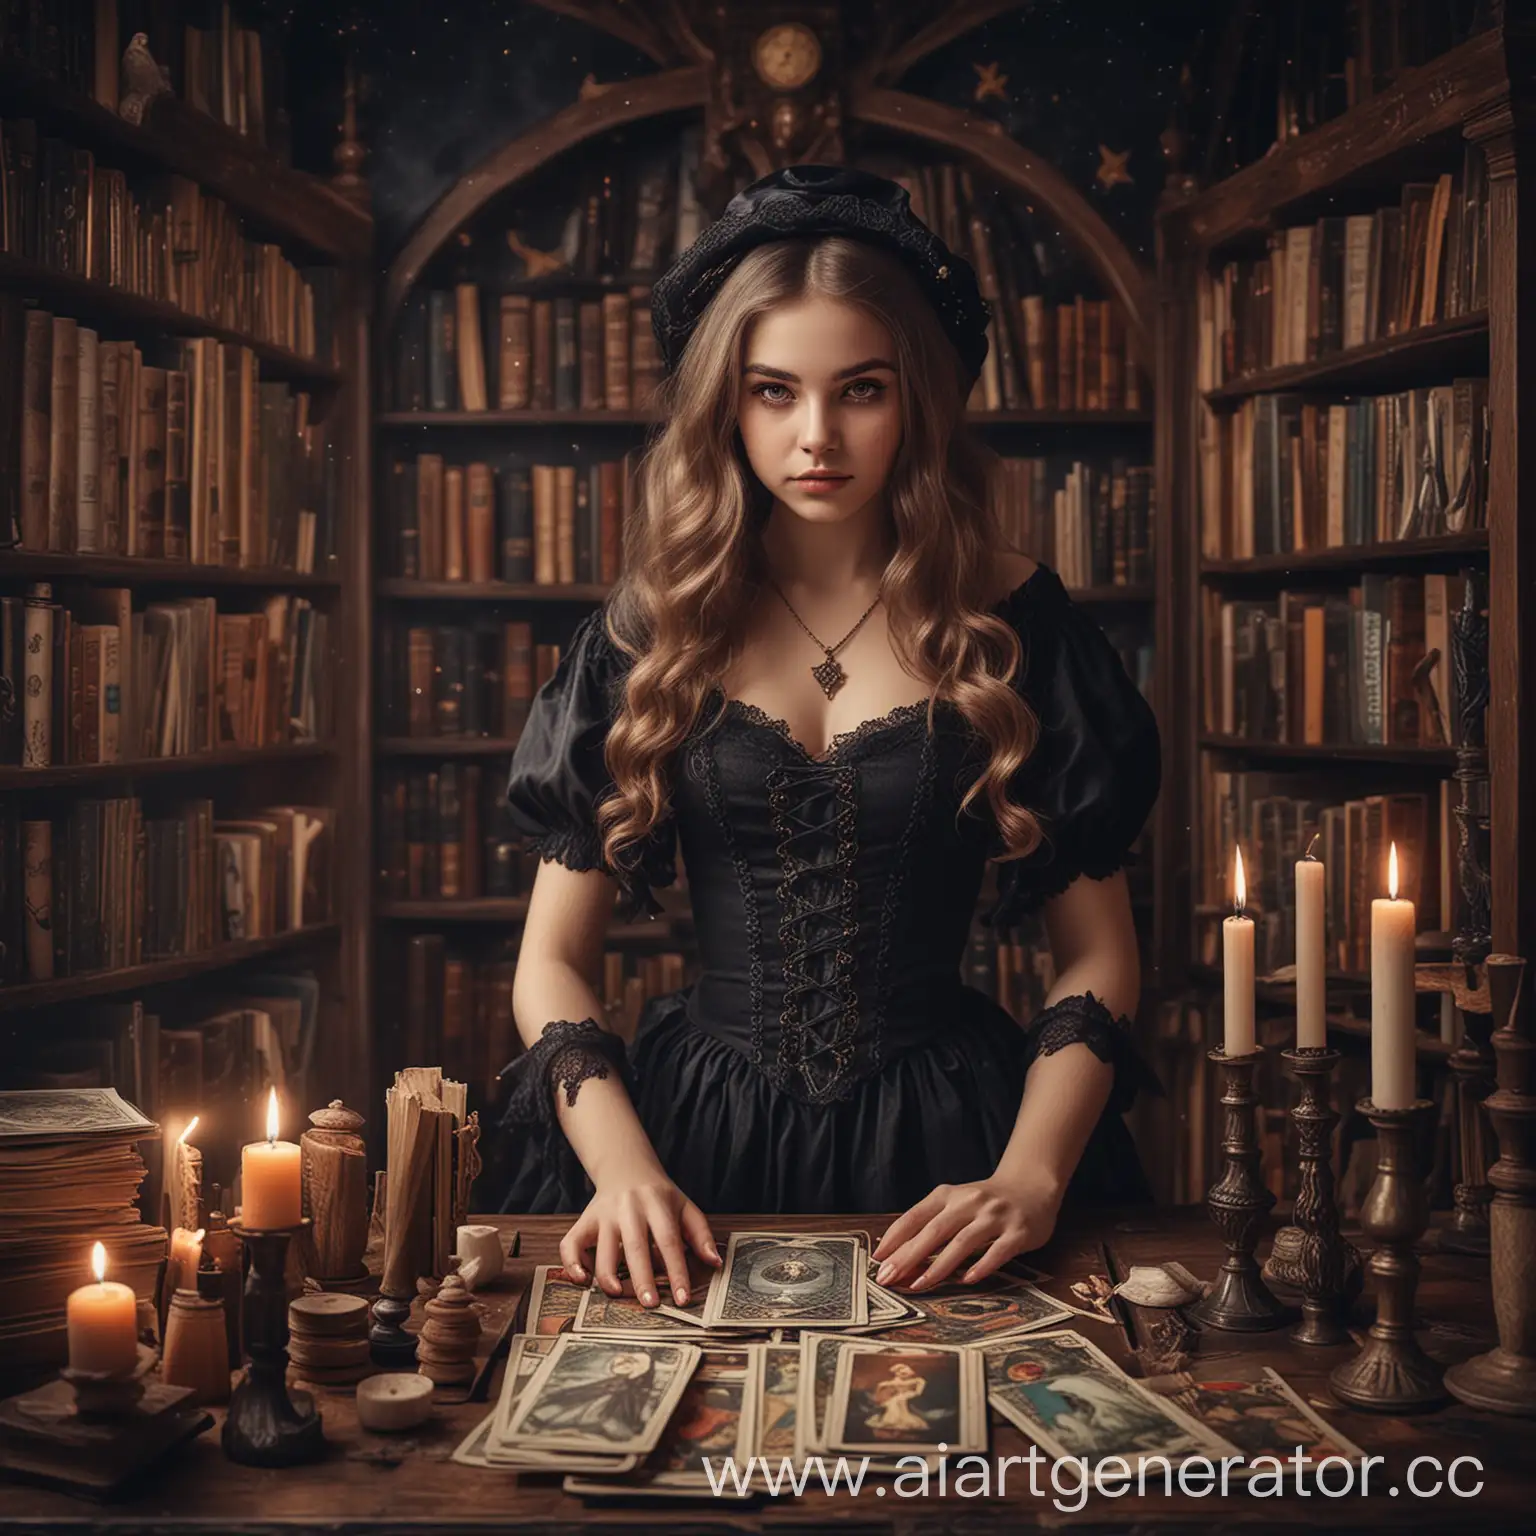 Enchanting-Witch-Girl-with-Tarot-Cards-in-FairyTale-Library-Art